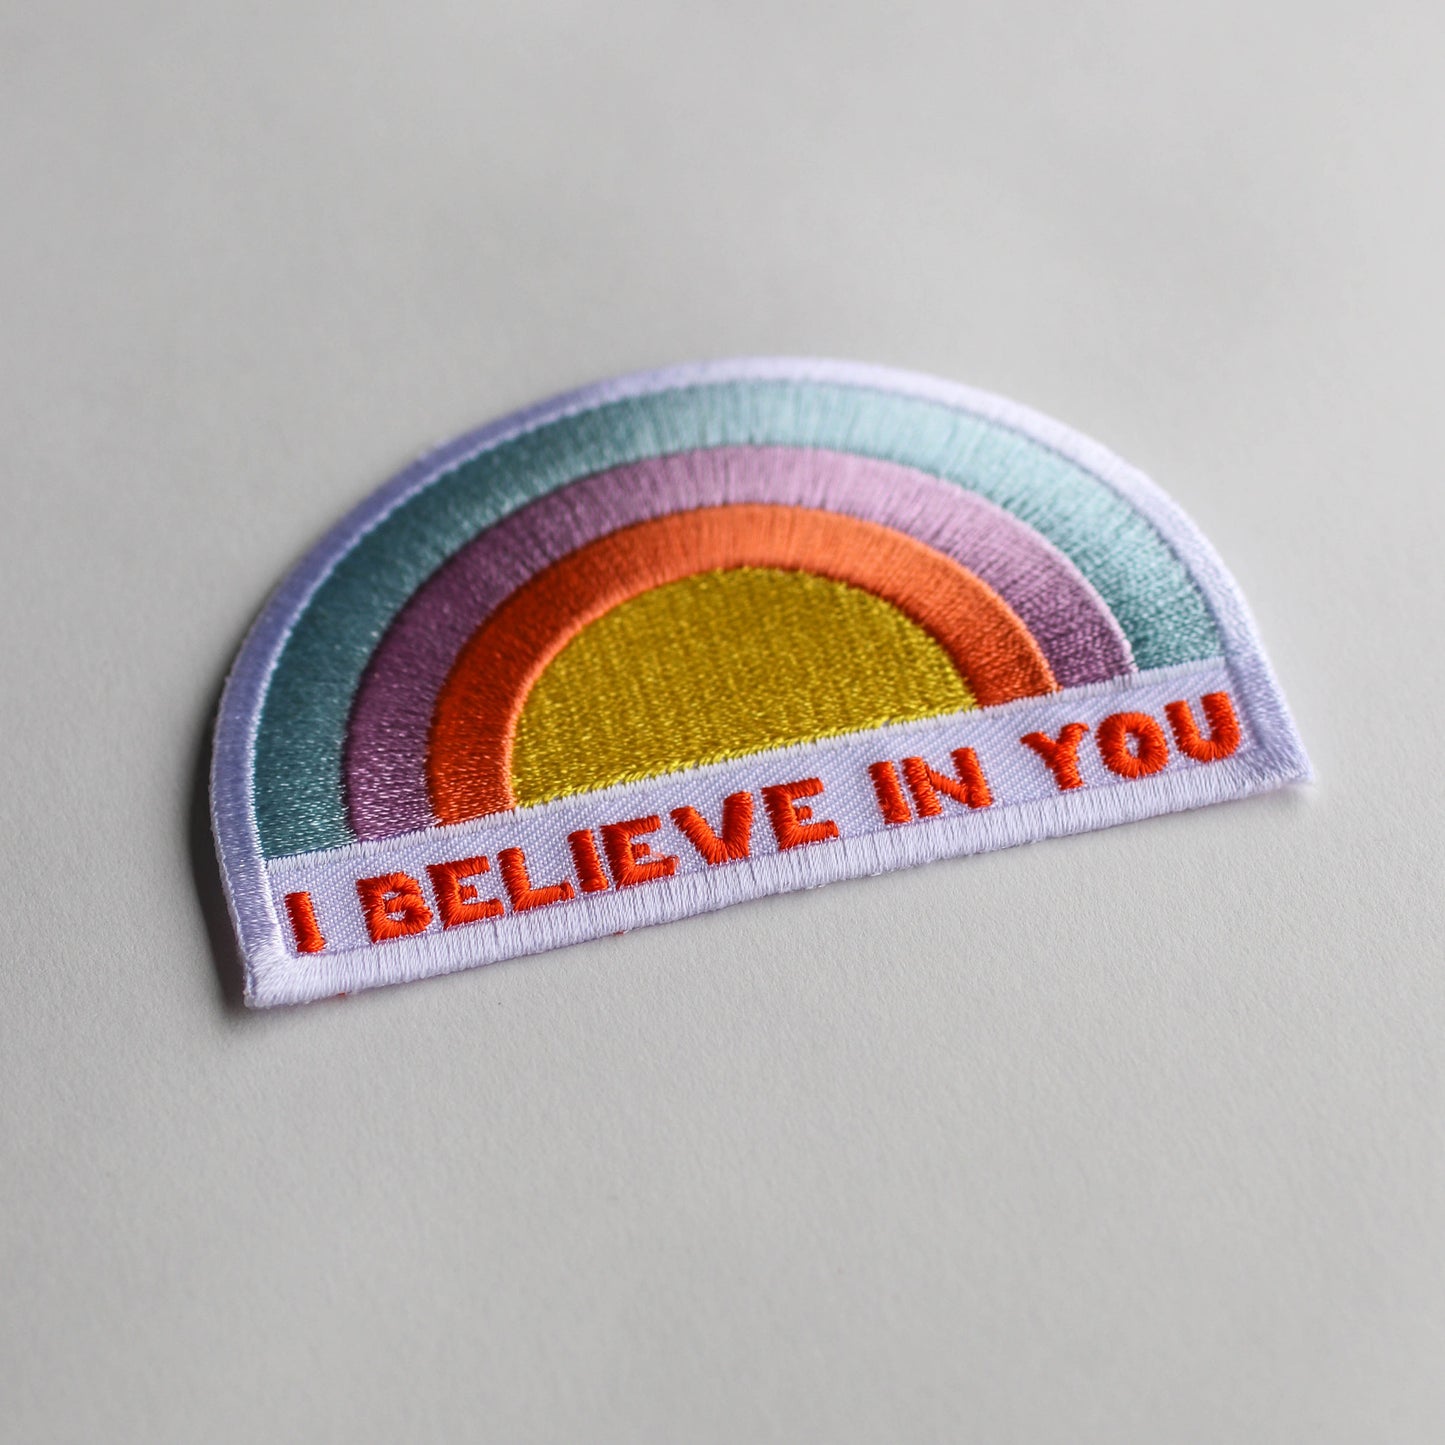 I Believe In You Patch